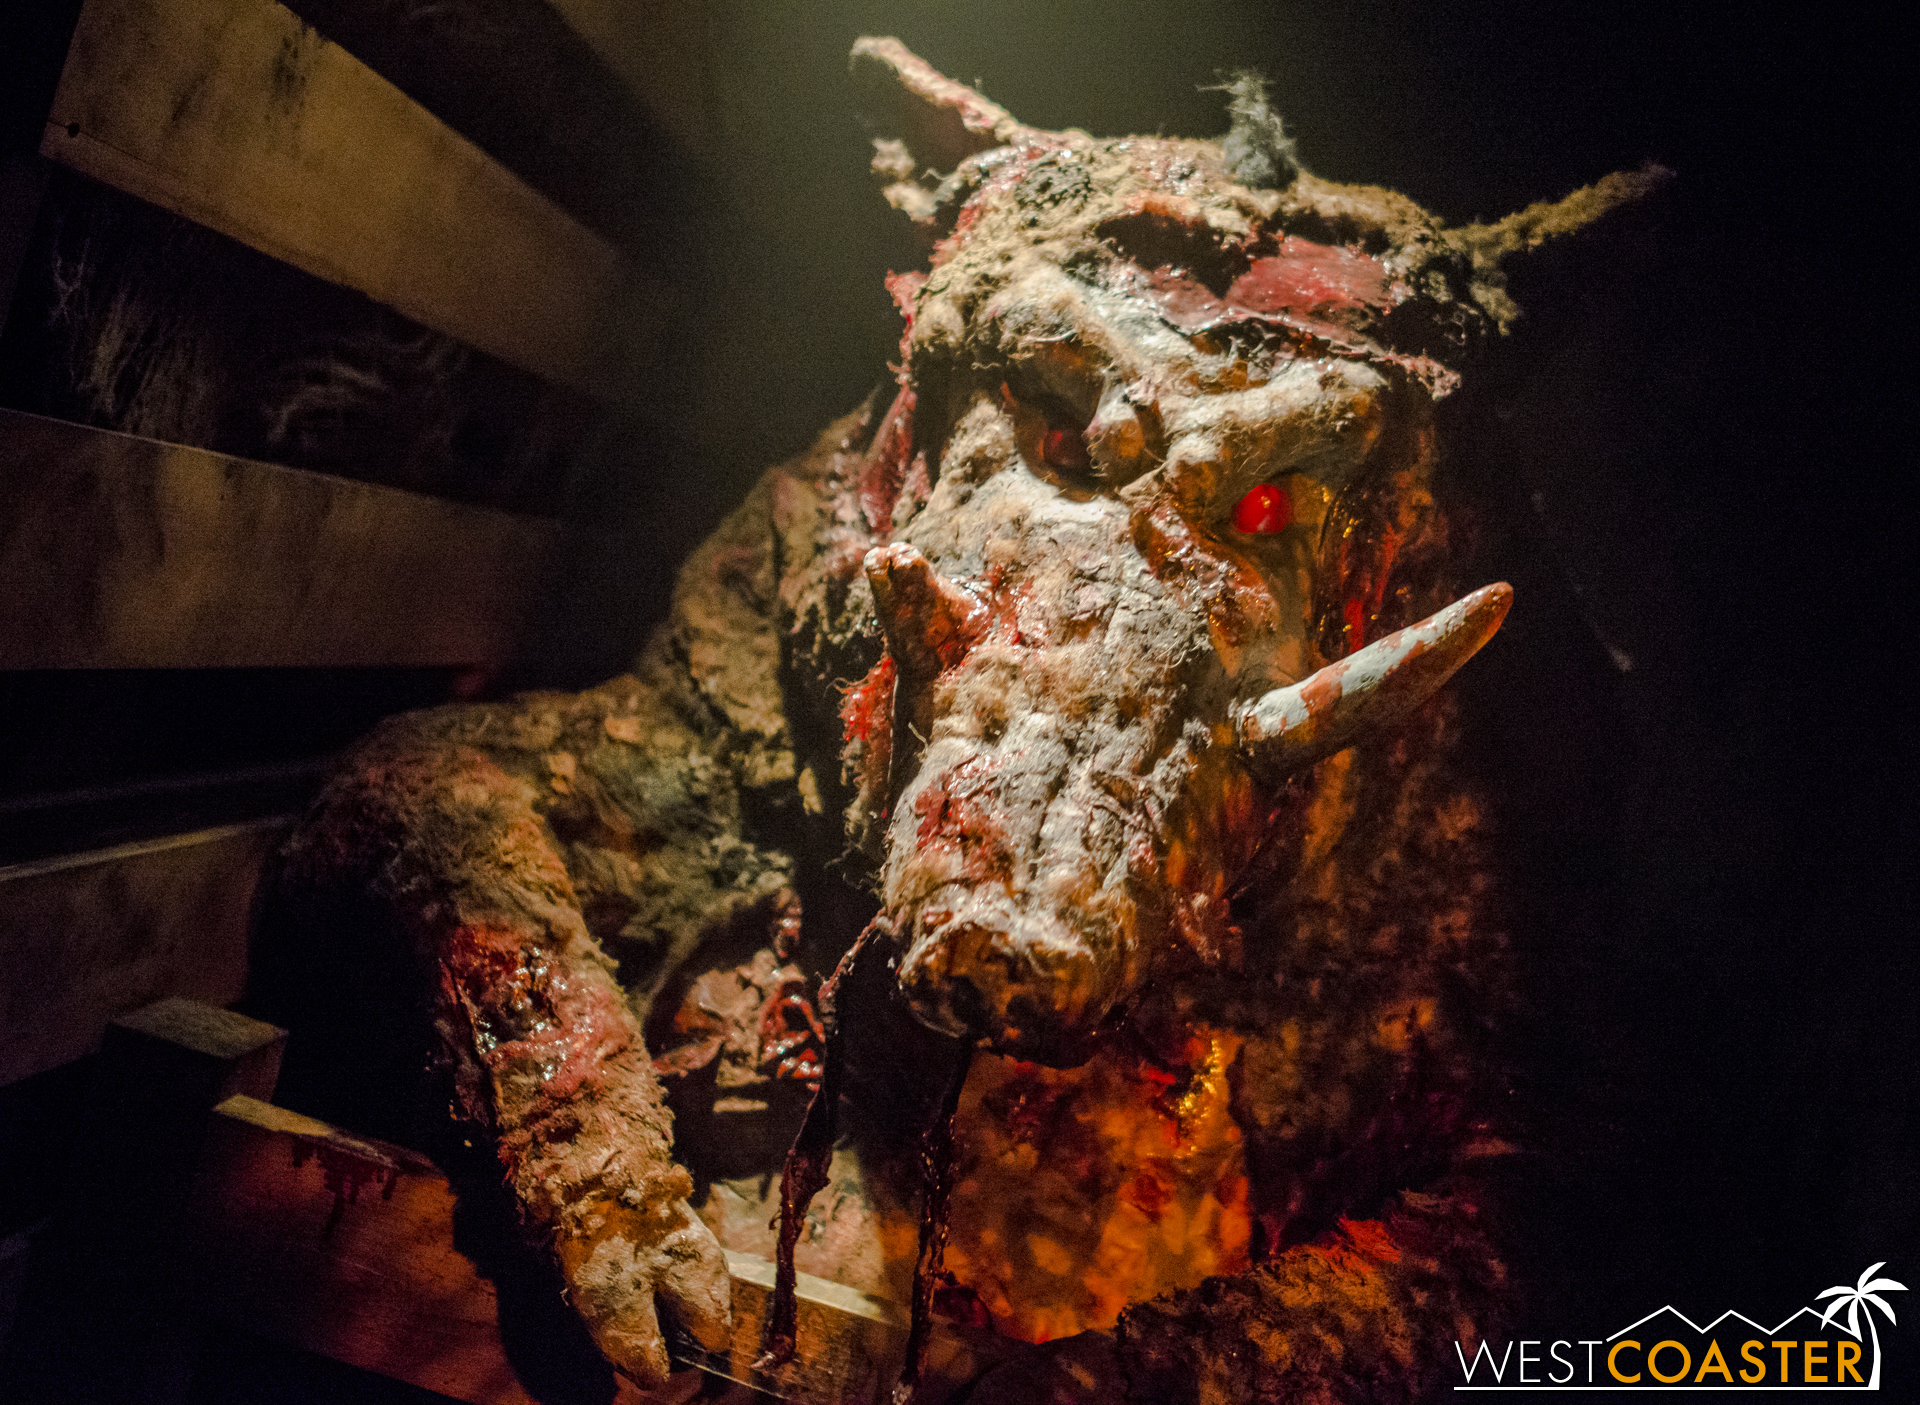  The animatronic is pretty fantastic.&nbsp; And disgusting looking. 